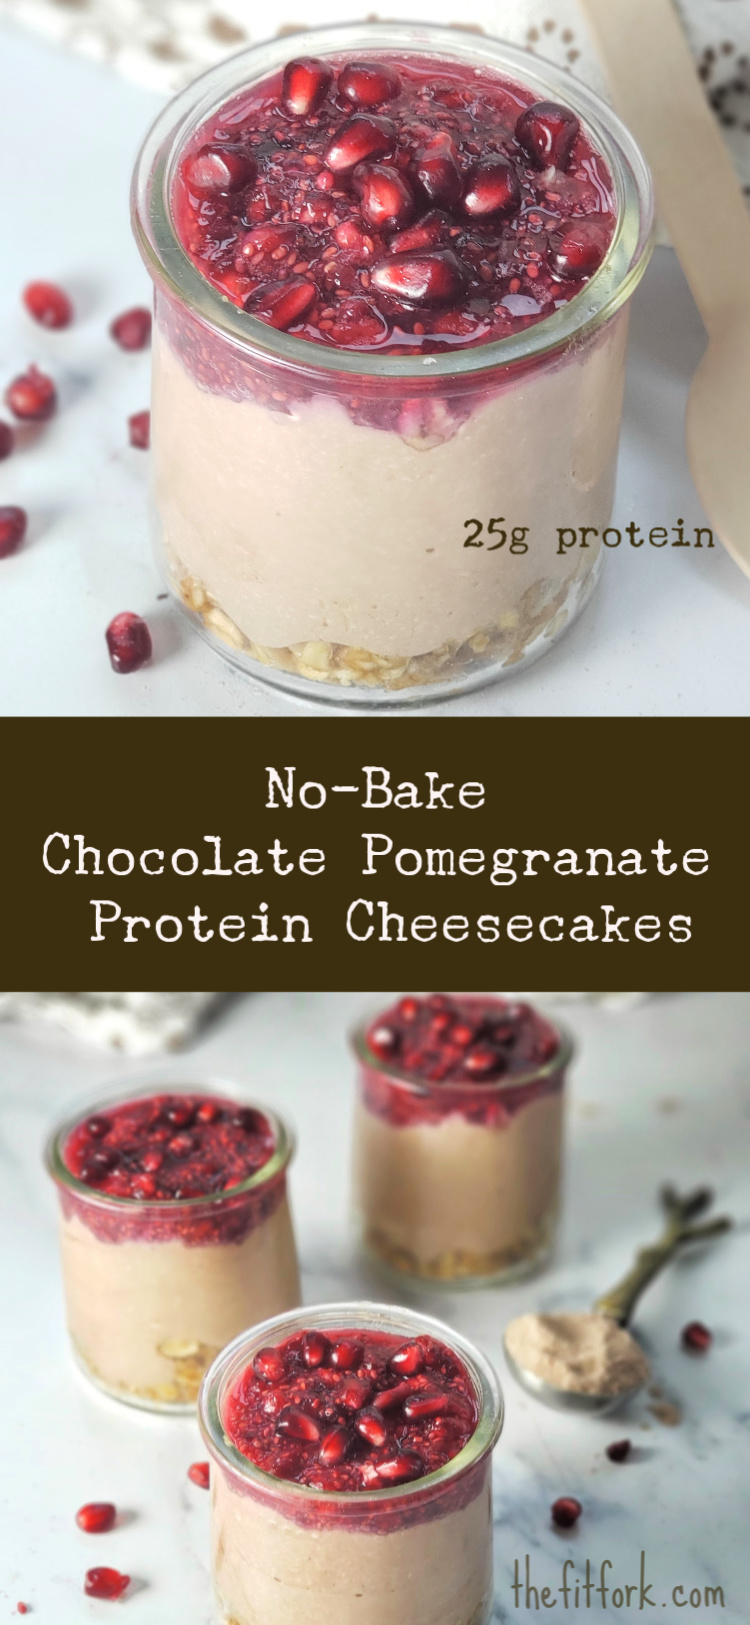 No Bake Chocolate Pomegranate Protein Cheesecakes - easy to meal prep for a grab and go breakfast, healthy dessert or post-workout snack. 25g protein thanks to cottage cheese blended with protein powder. 